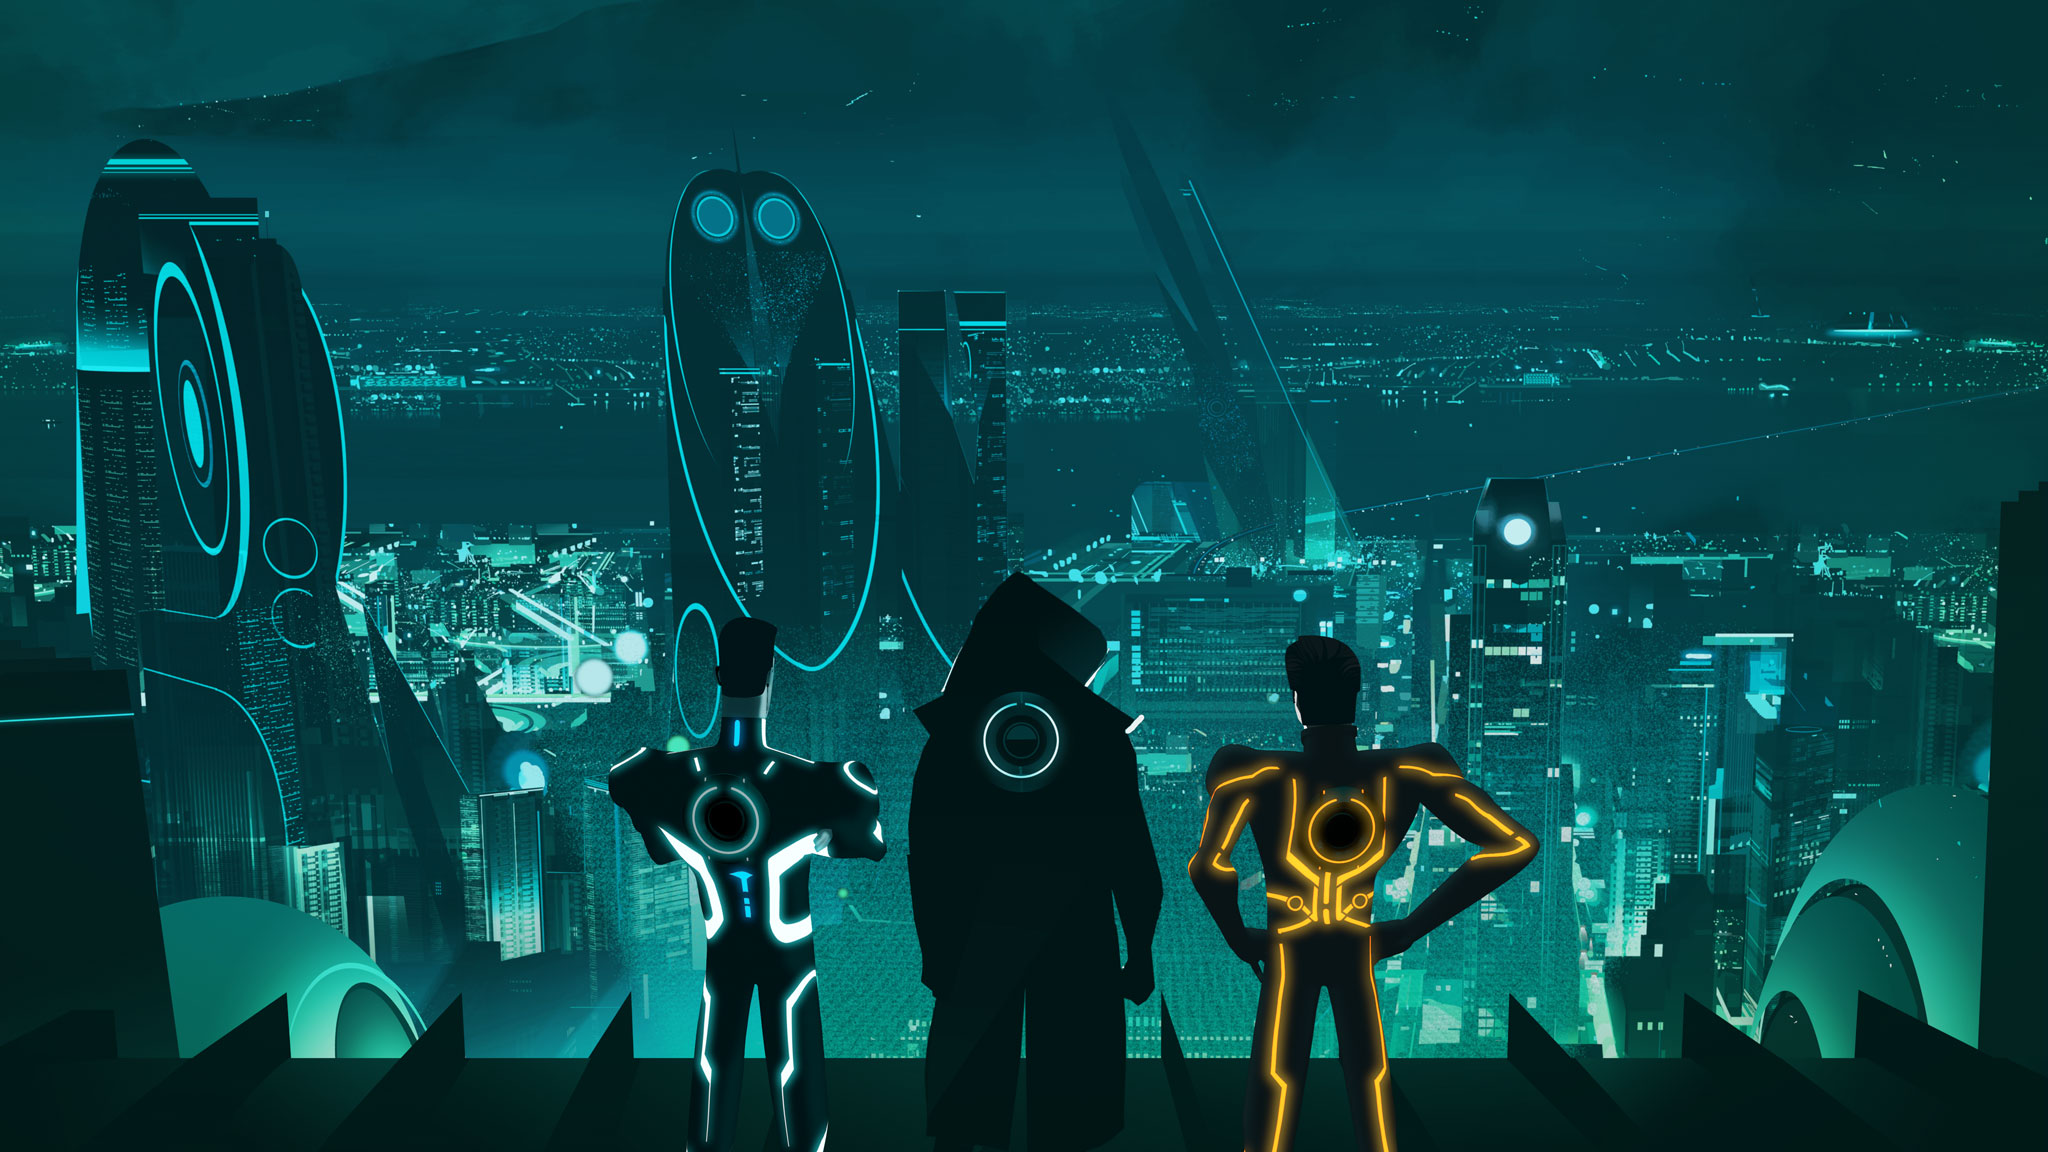 TV Show Tron: Uprising HD Wallpaper | Background Image